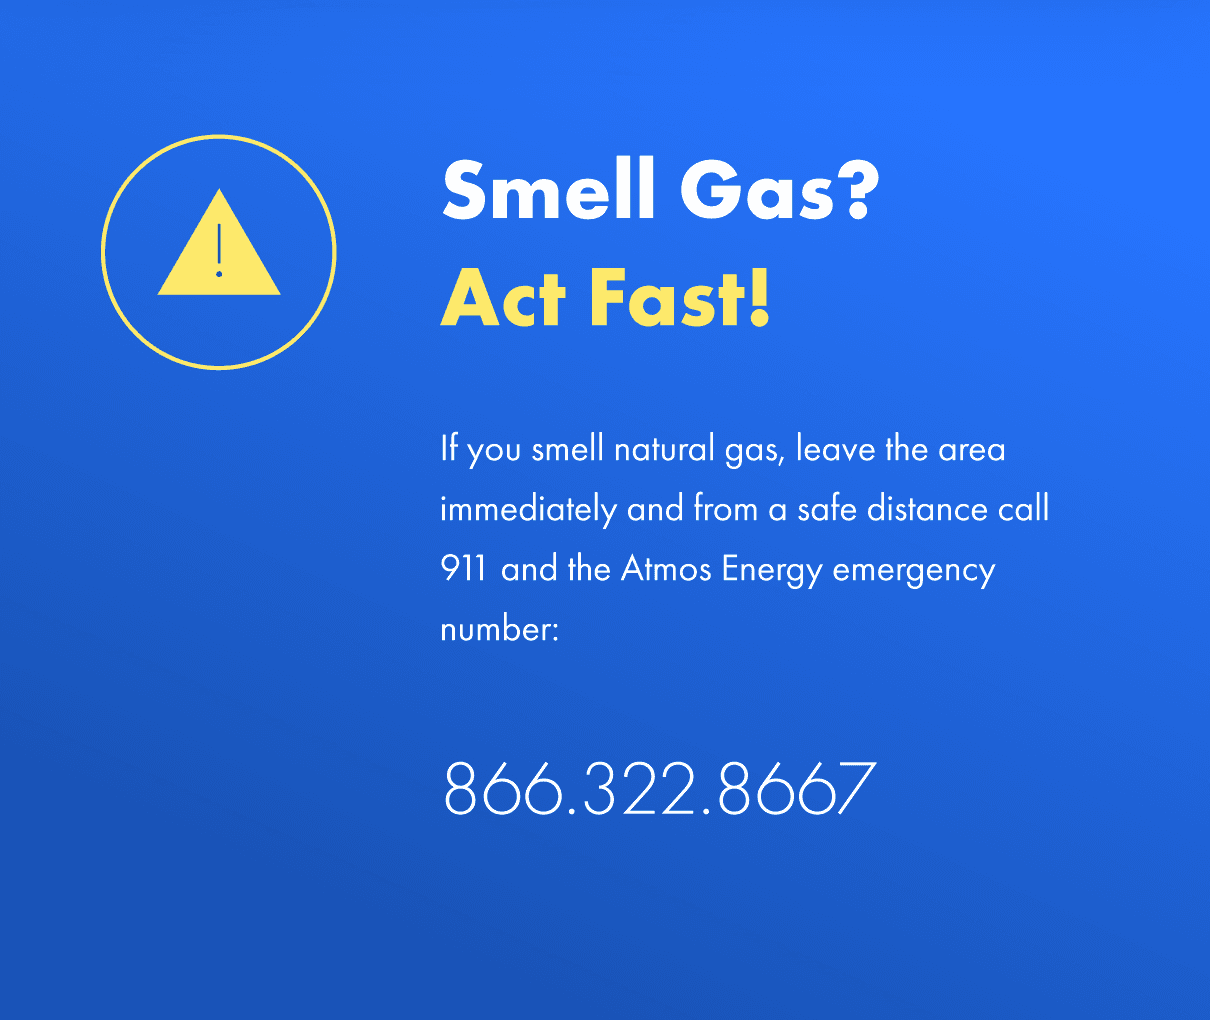 Smell Gas? Act Fast!  Call 866-322-8667